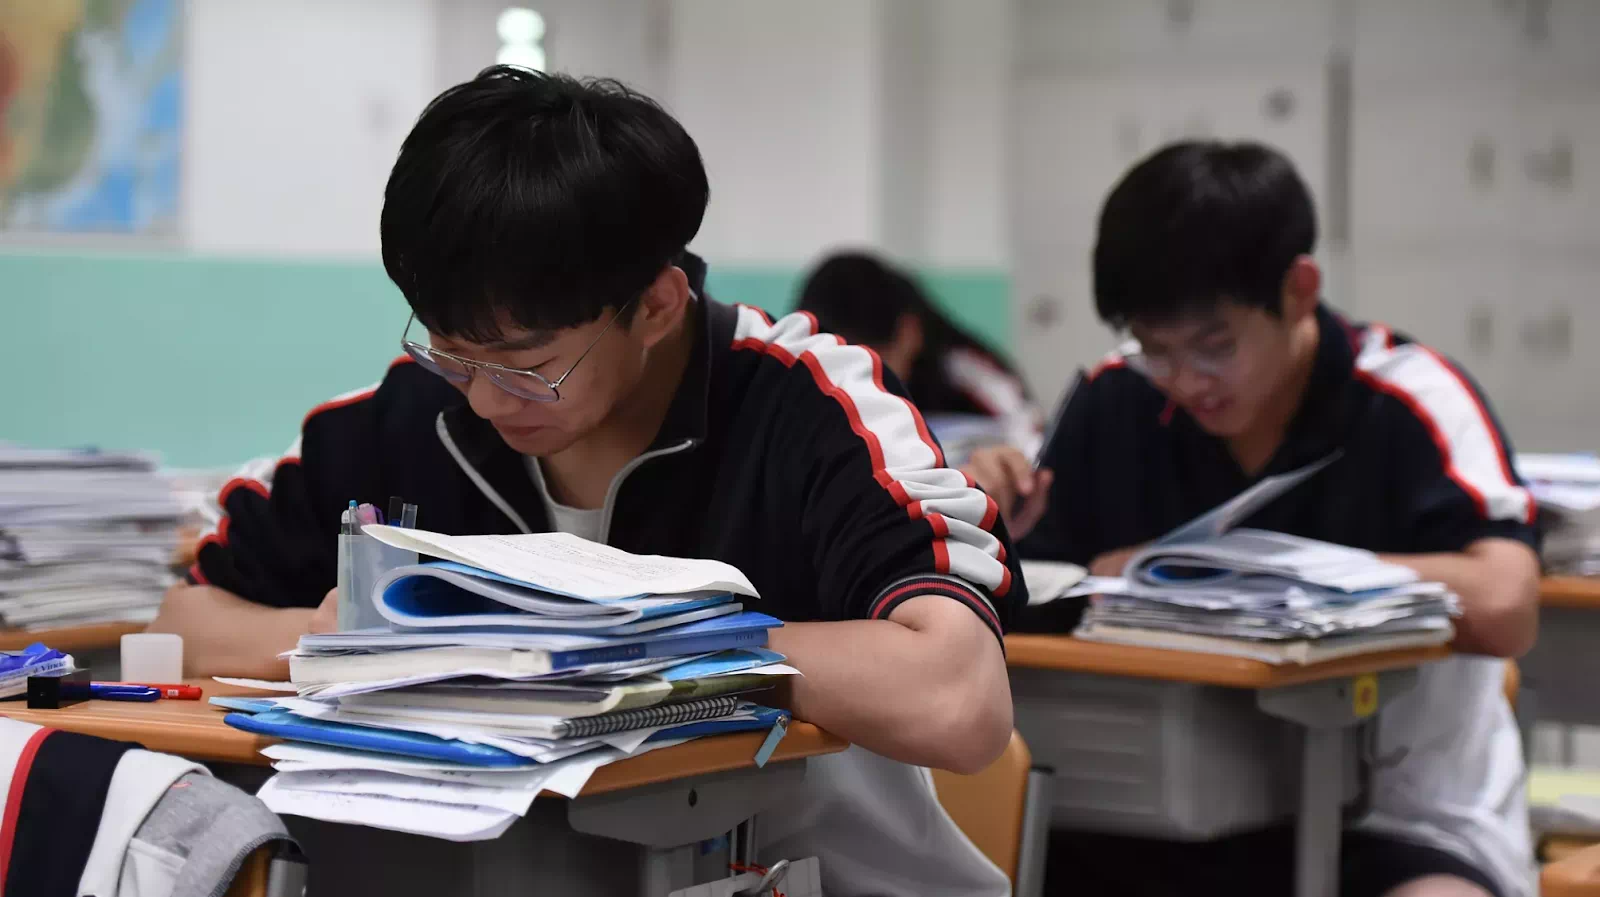 Over 5 Million Chinese Students Suffer From Spinal Deformity